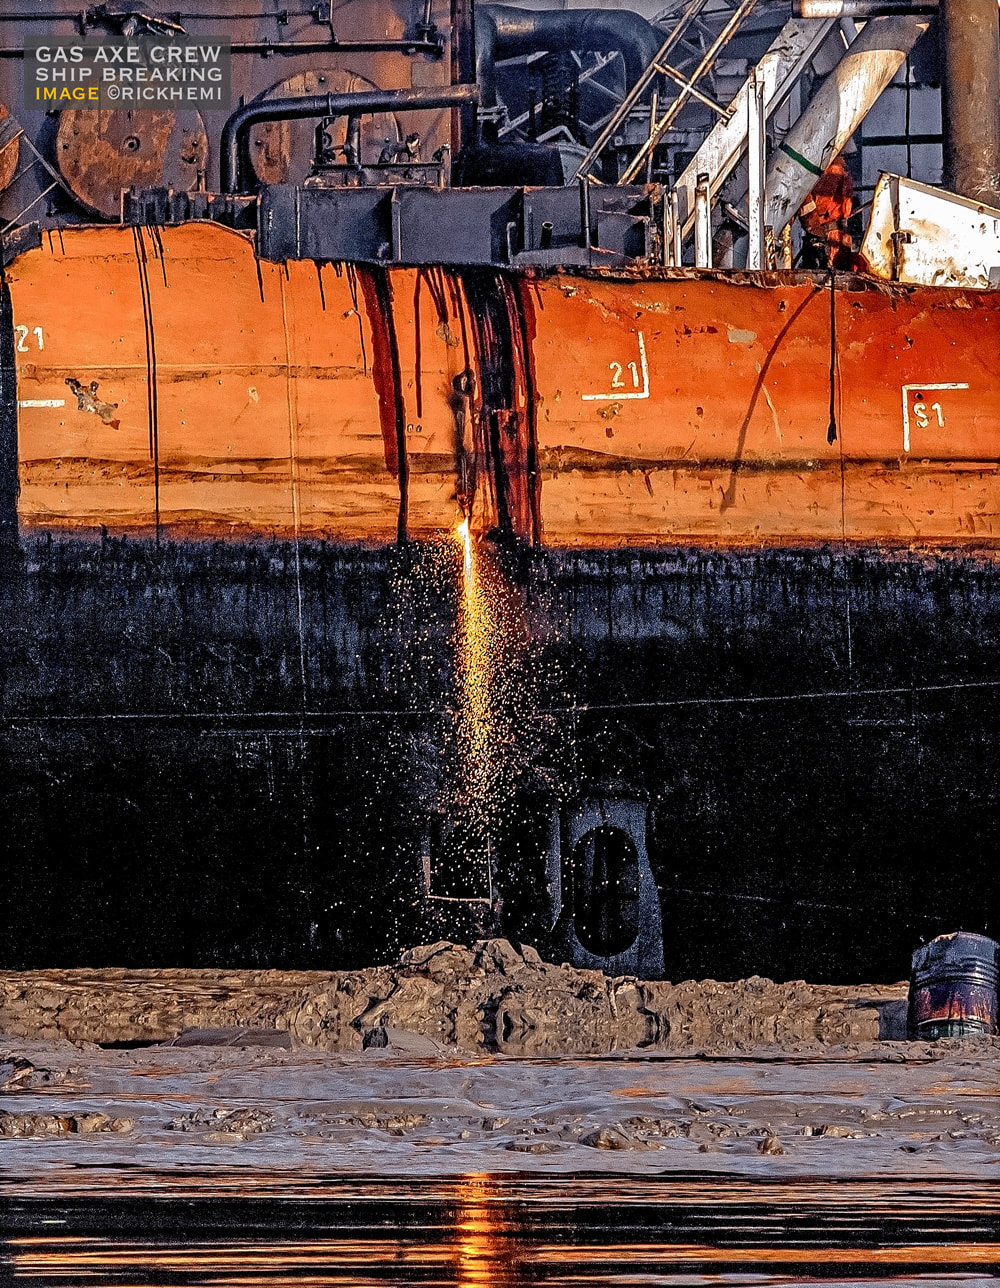 Asia solo overland travel photography, ship breaking gas axe crew image by Rick Hemi